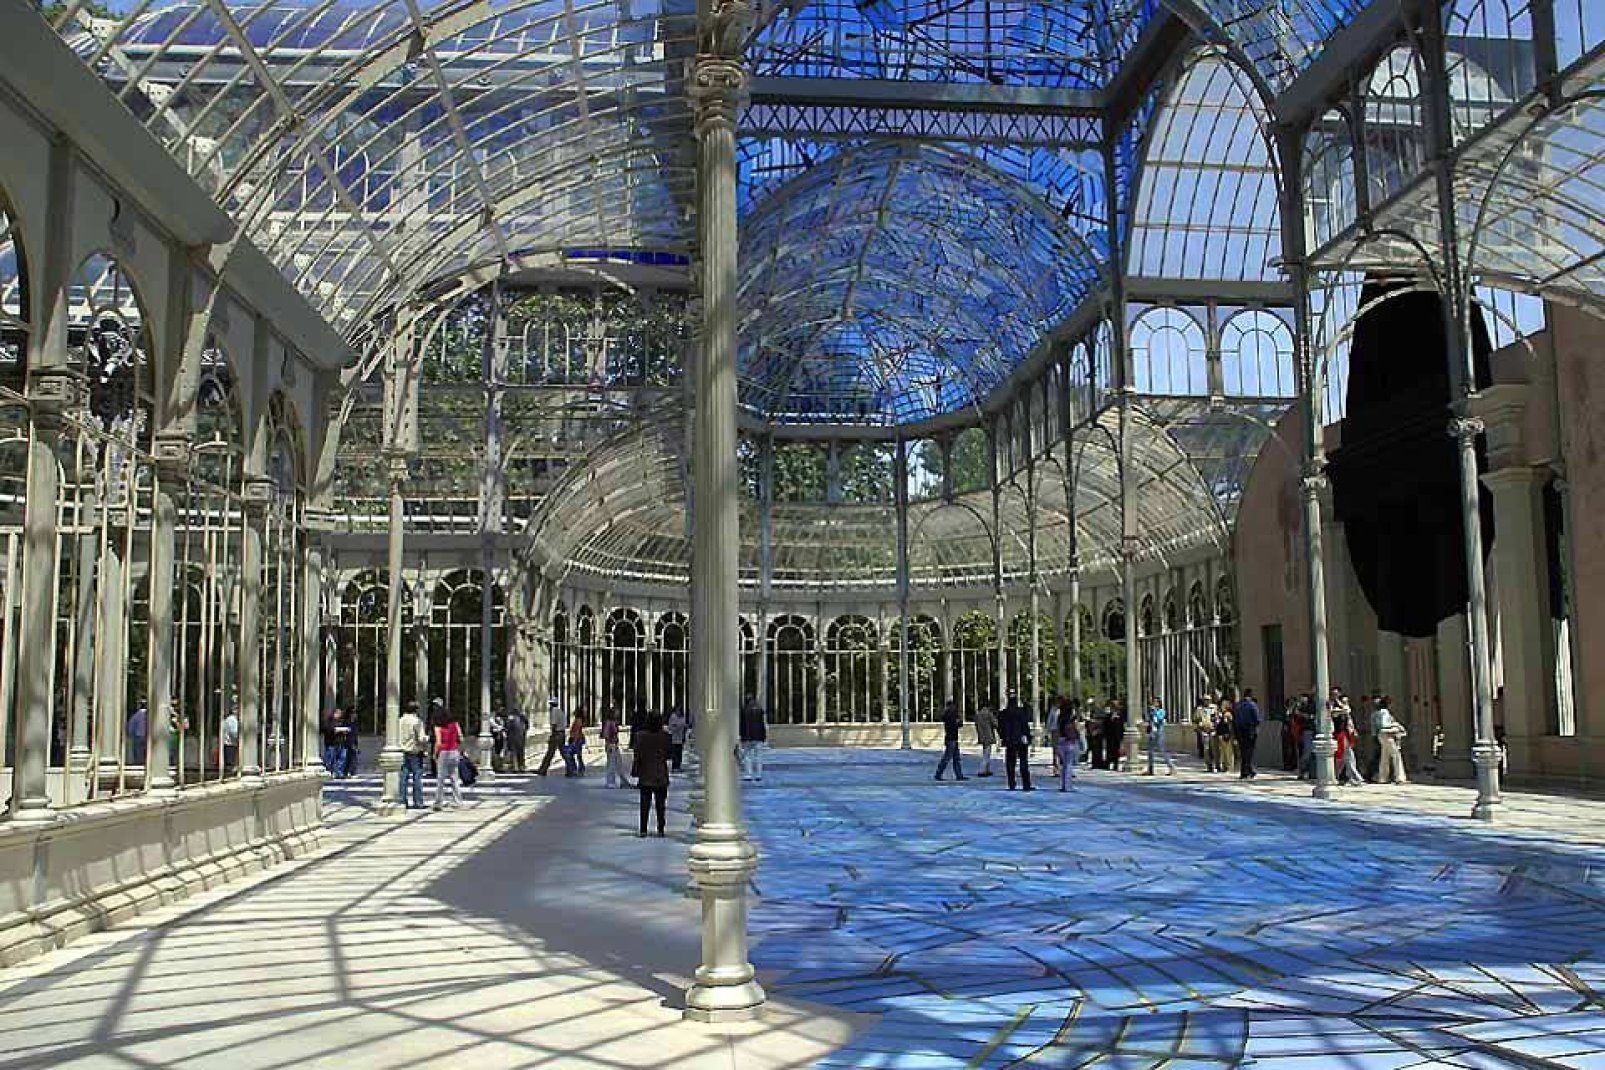 In the middle of Retiro Park you will find a replica of London's Crystal Palace, built 36 years after the original. It was designed by architect Ricardo Velazquez Bosco.